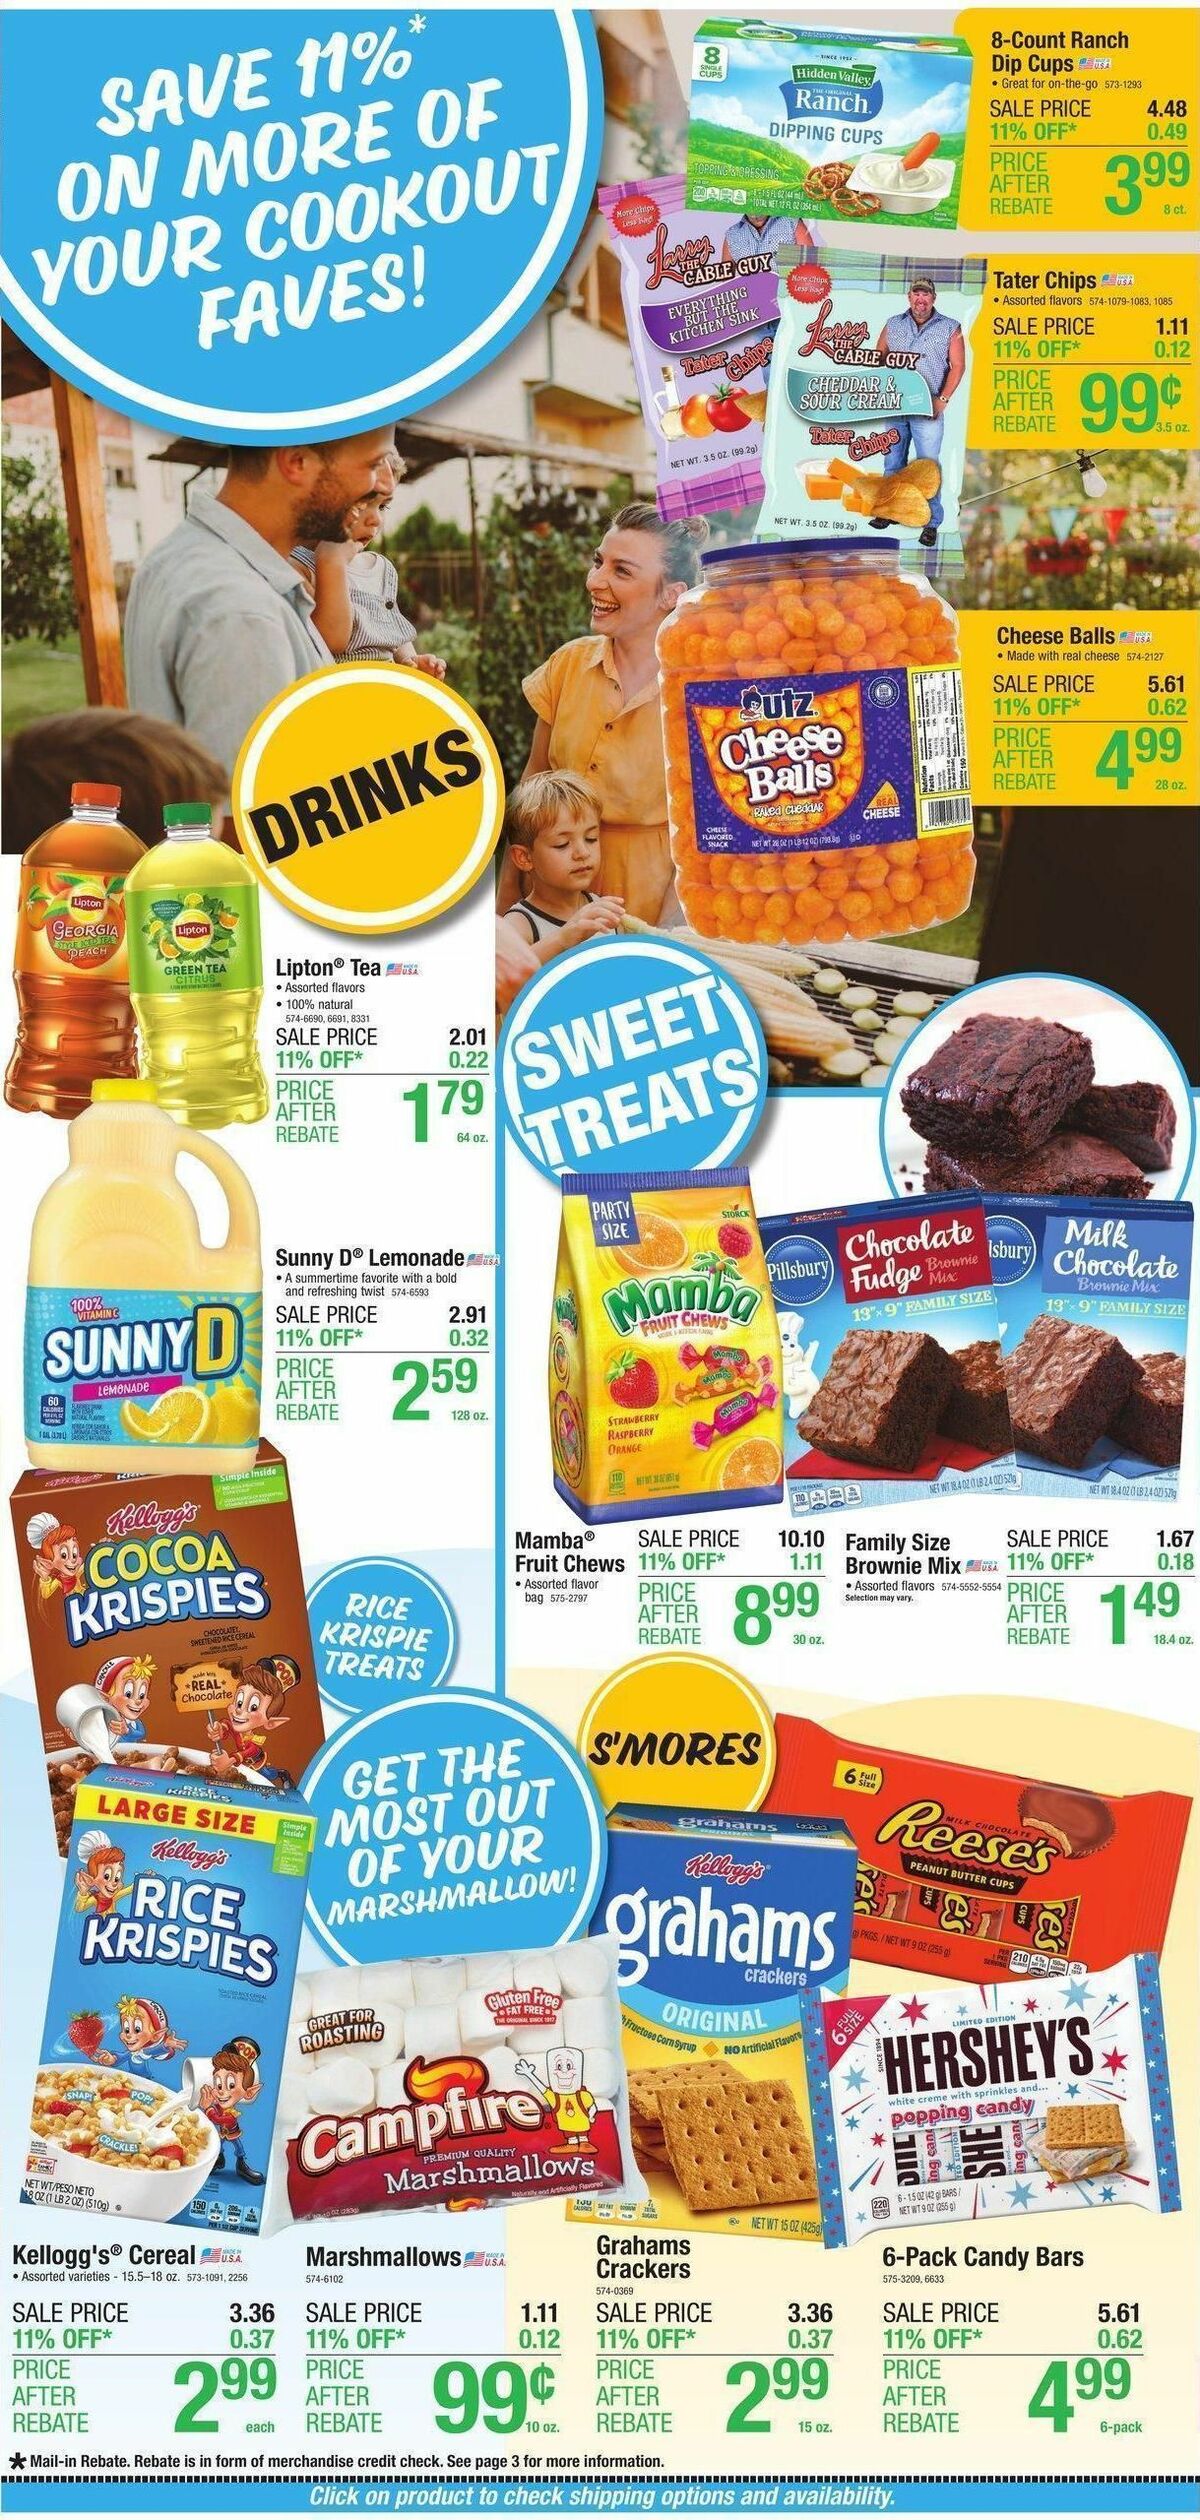 Menards Home Essentials Weekly Ad from June 22